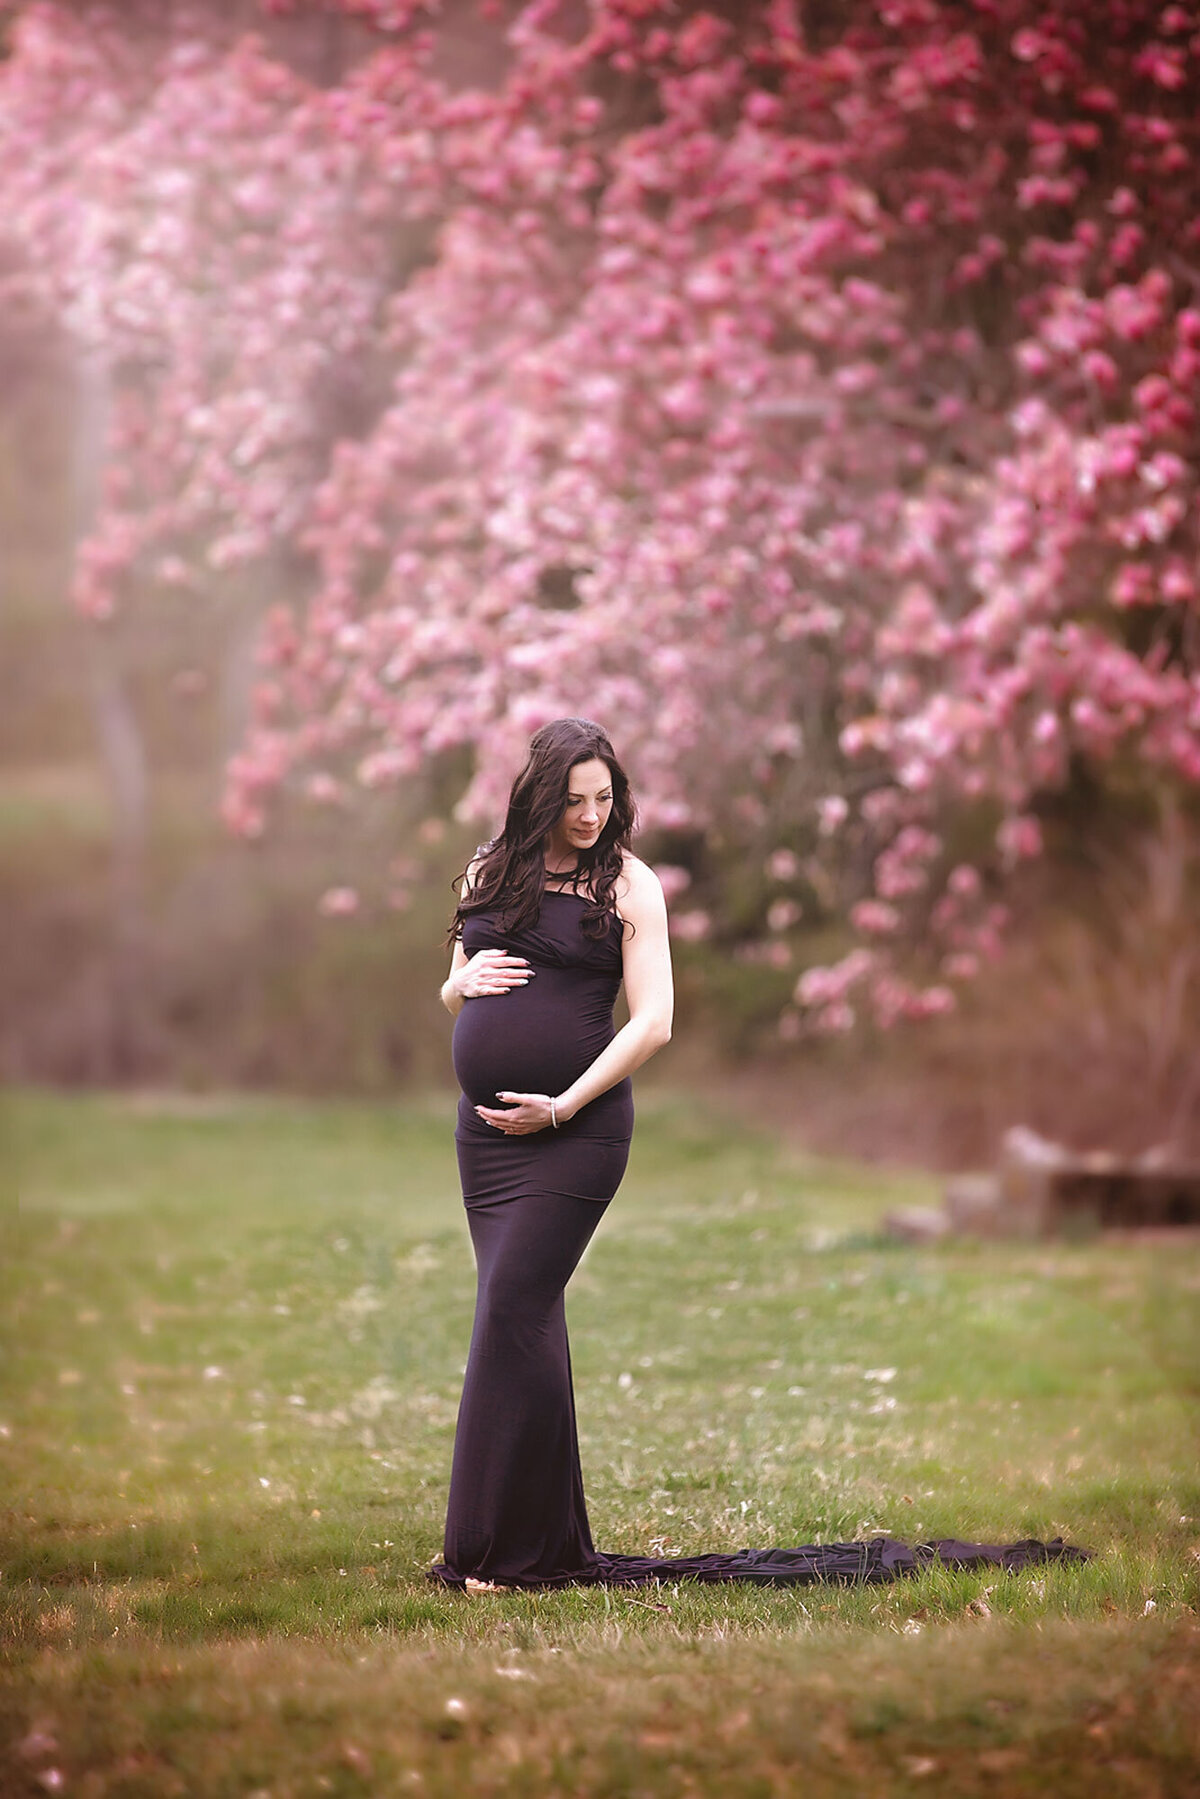 expecing woman wearing a form fitting black dress standing by a magnolia tree